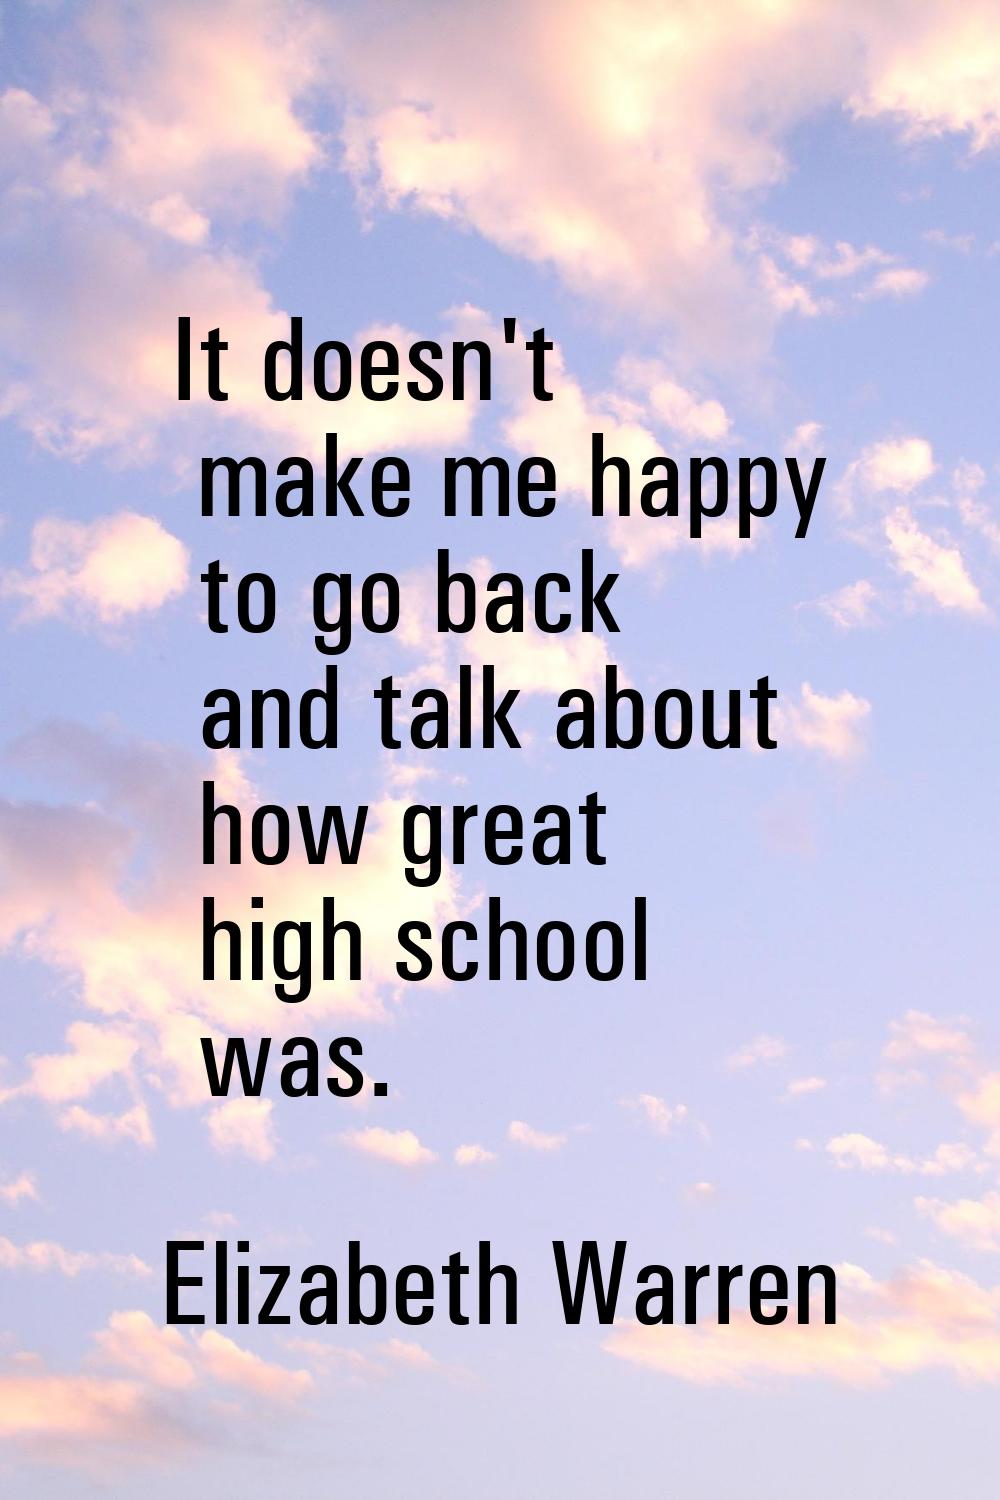 It doesn't make me happy to go back and talk about how great high school was.